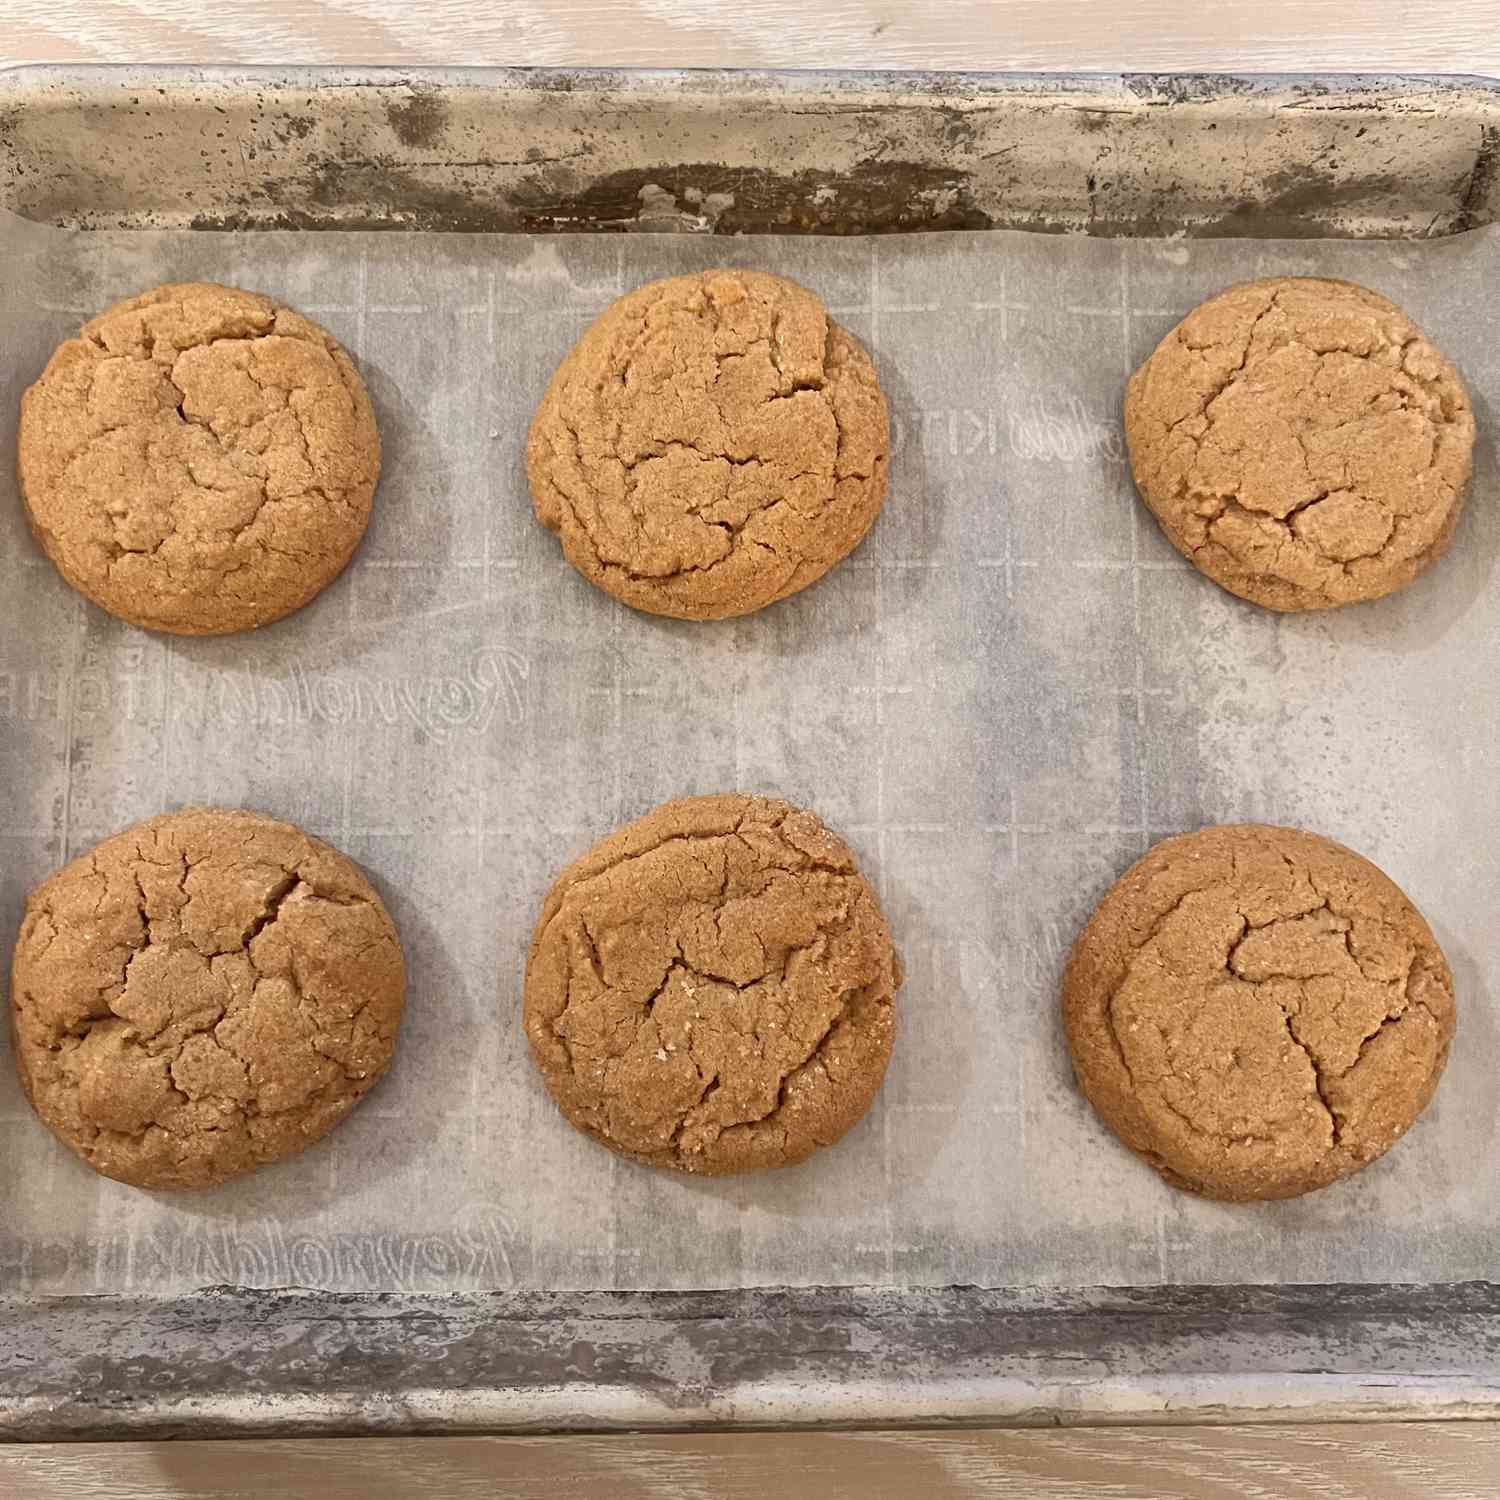 peanut butter cookies/tester image